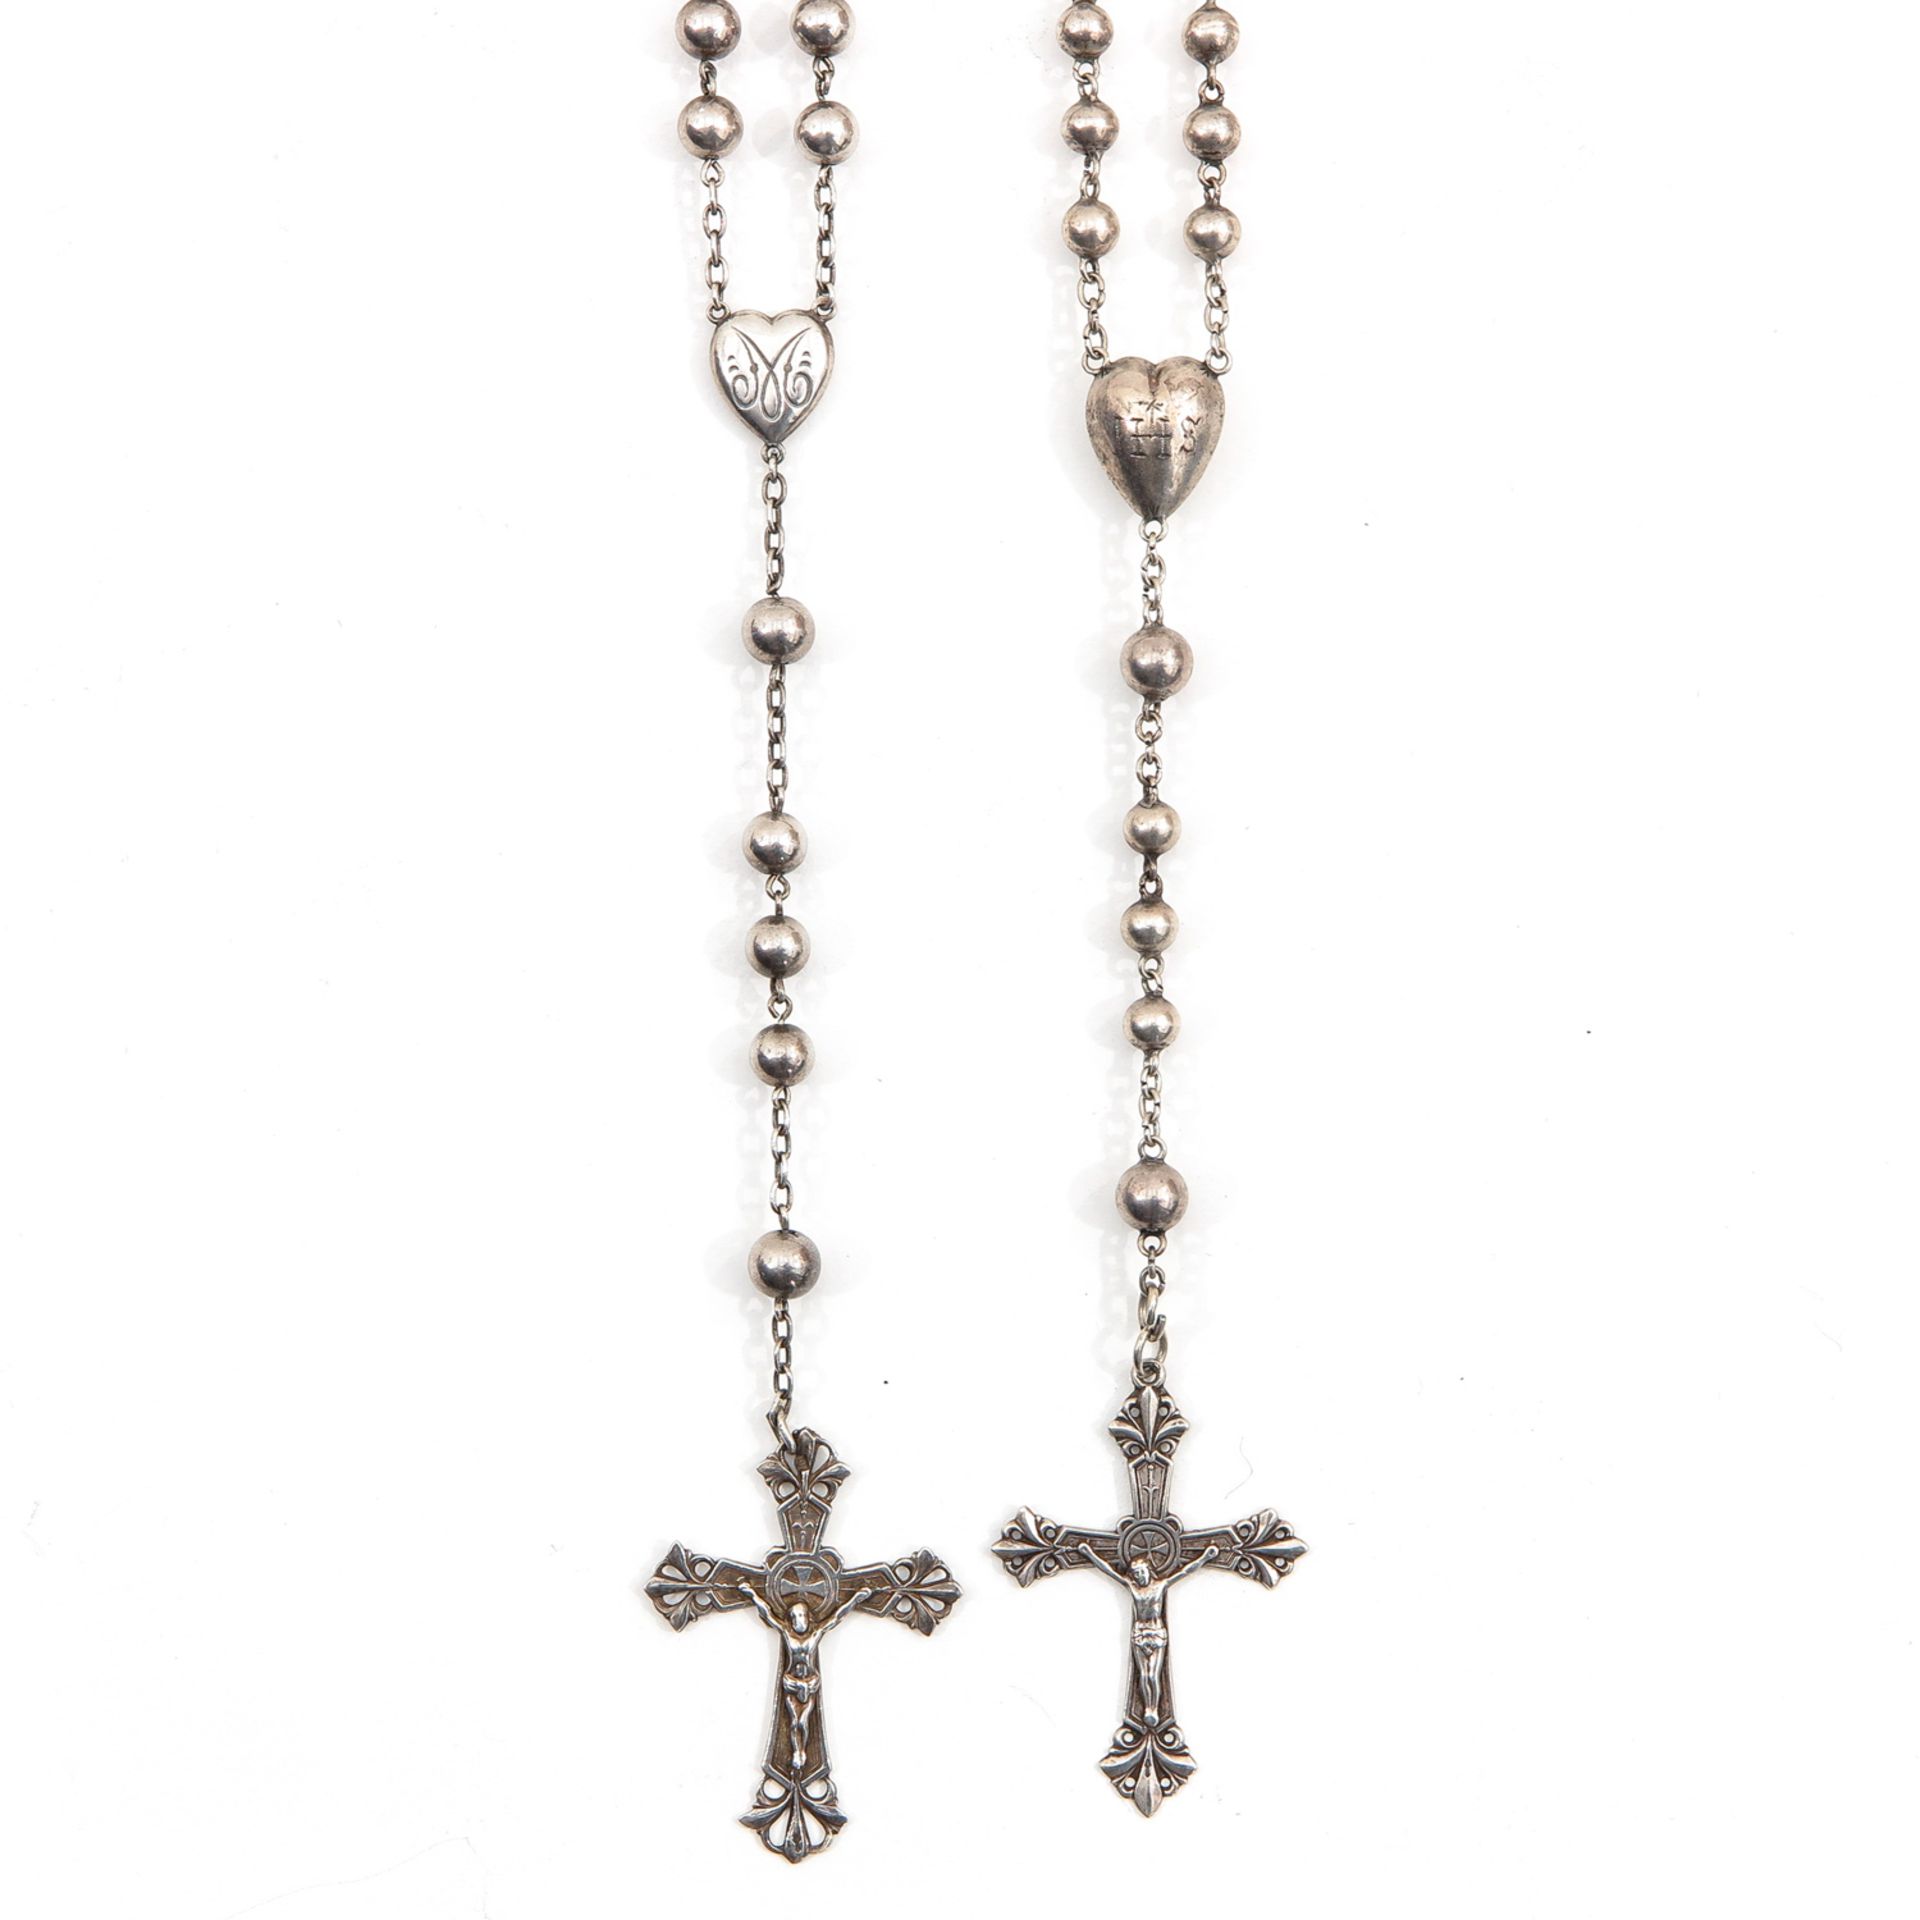 A Collection of 7 Silver Rosaries - Image 4 of 5